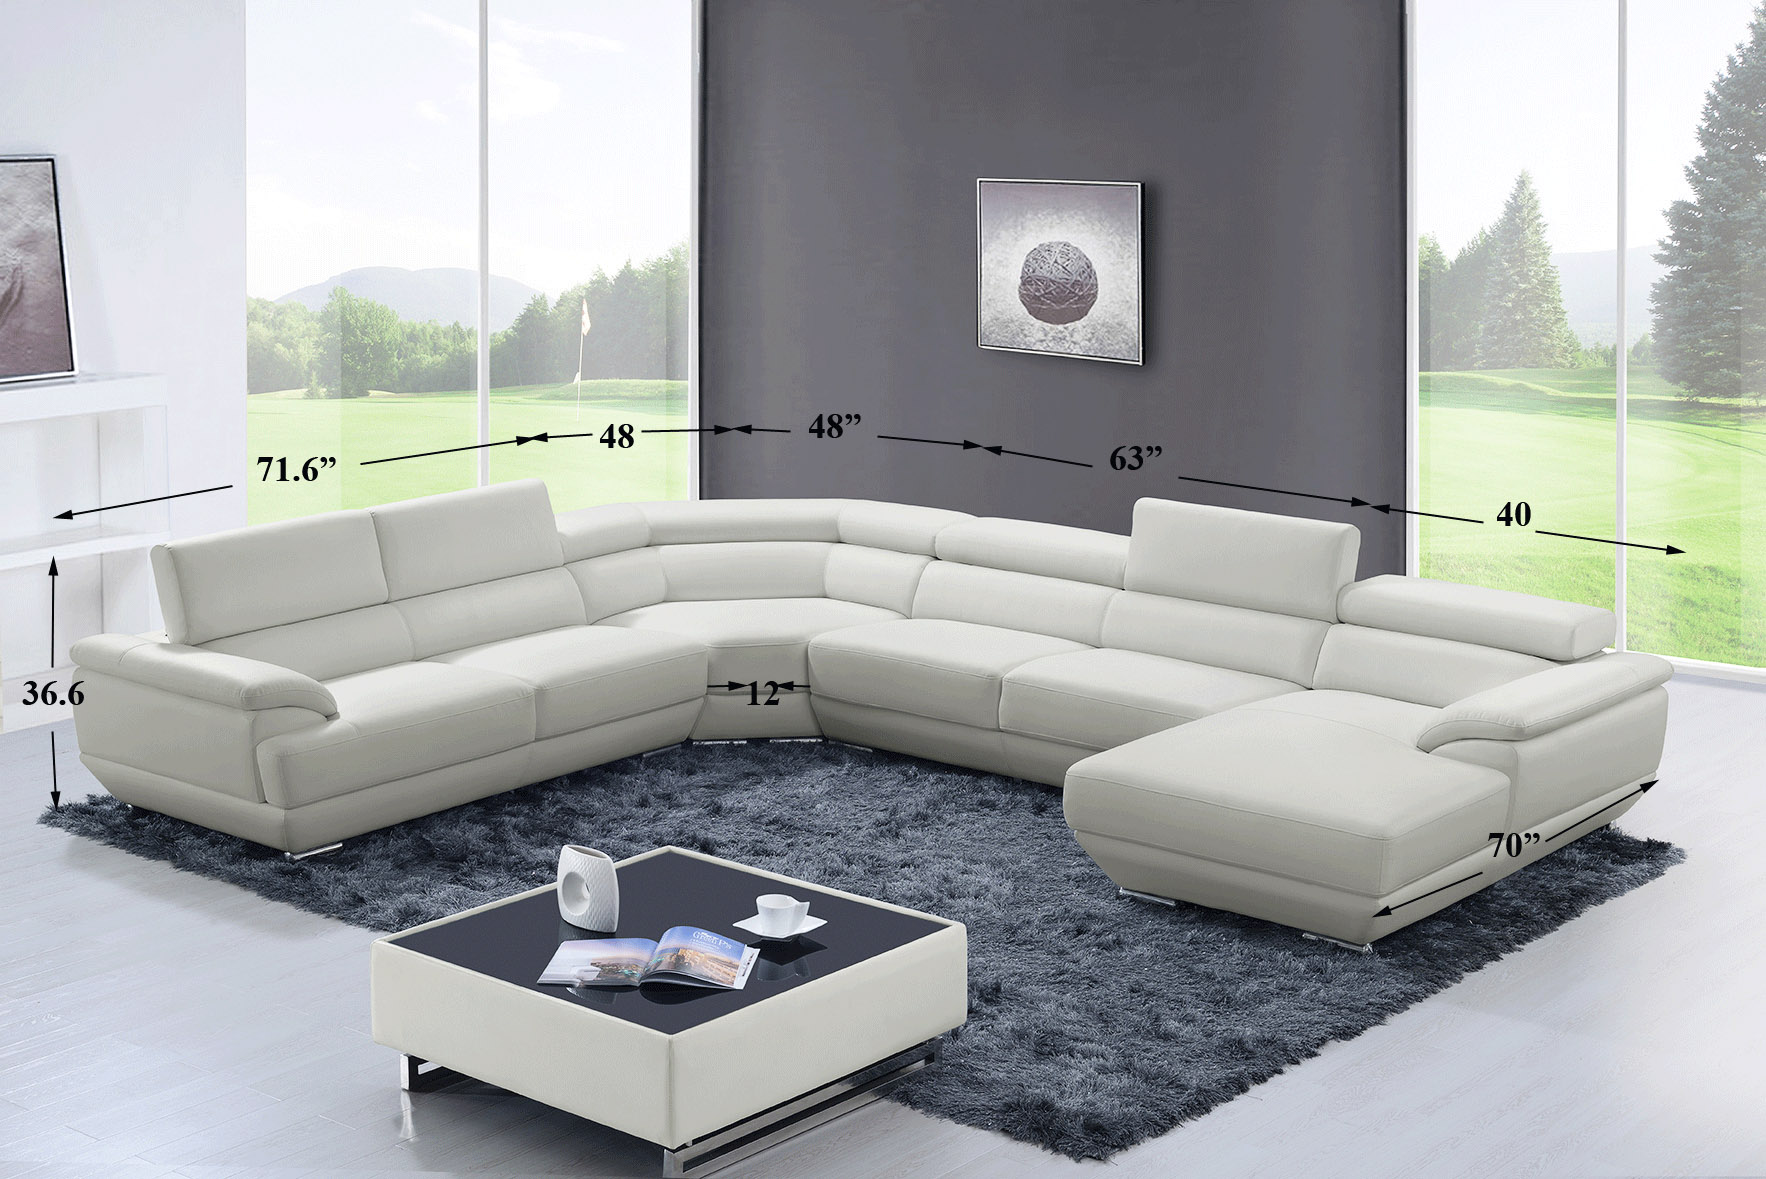 Living Room With White Leather Sectional